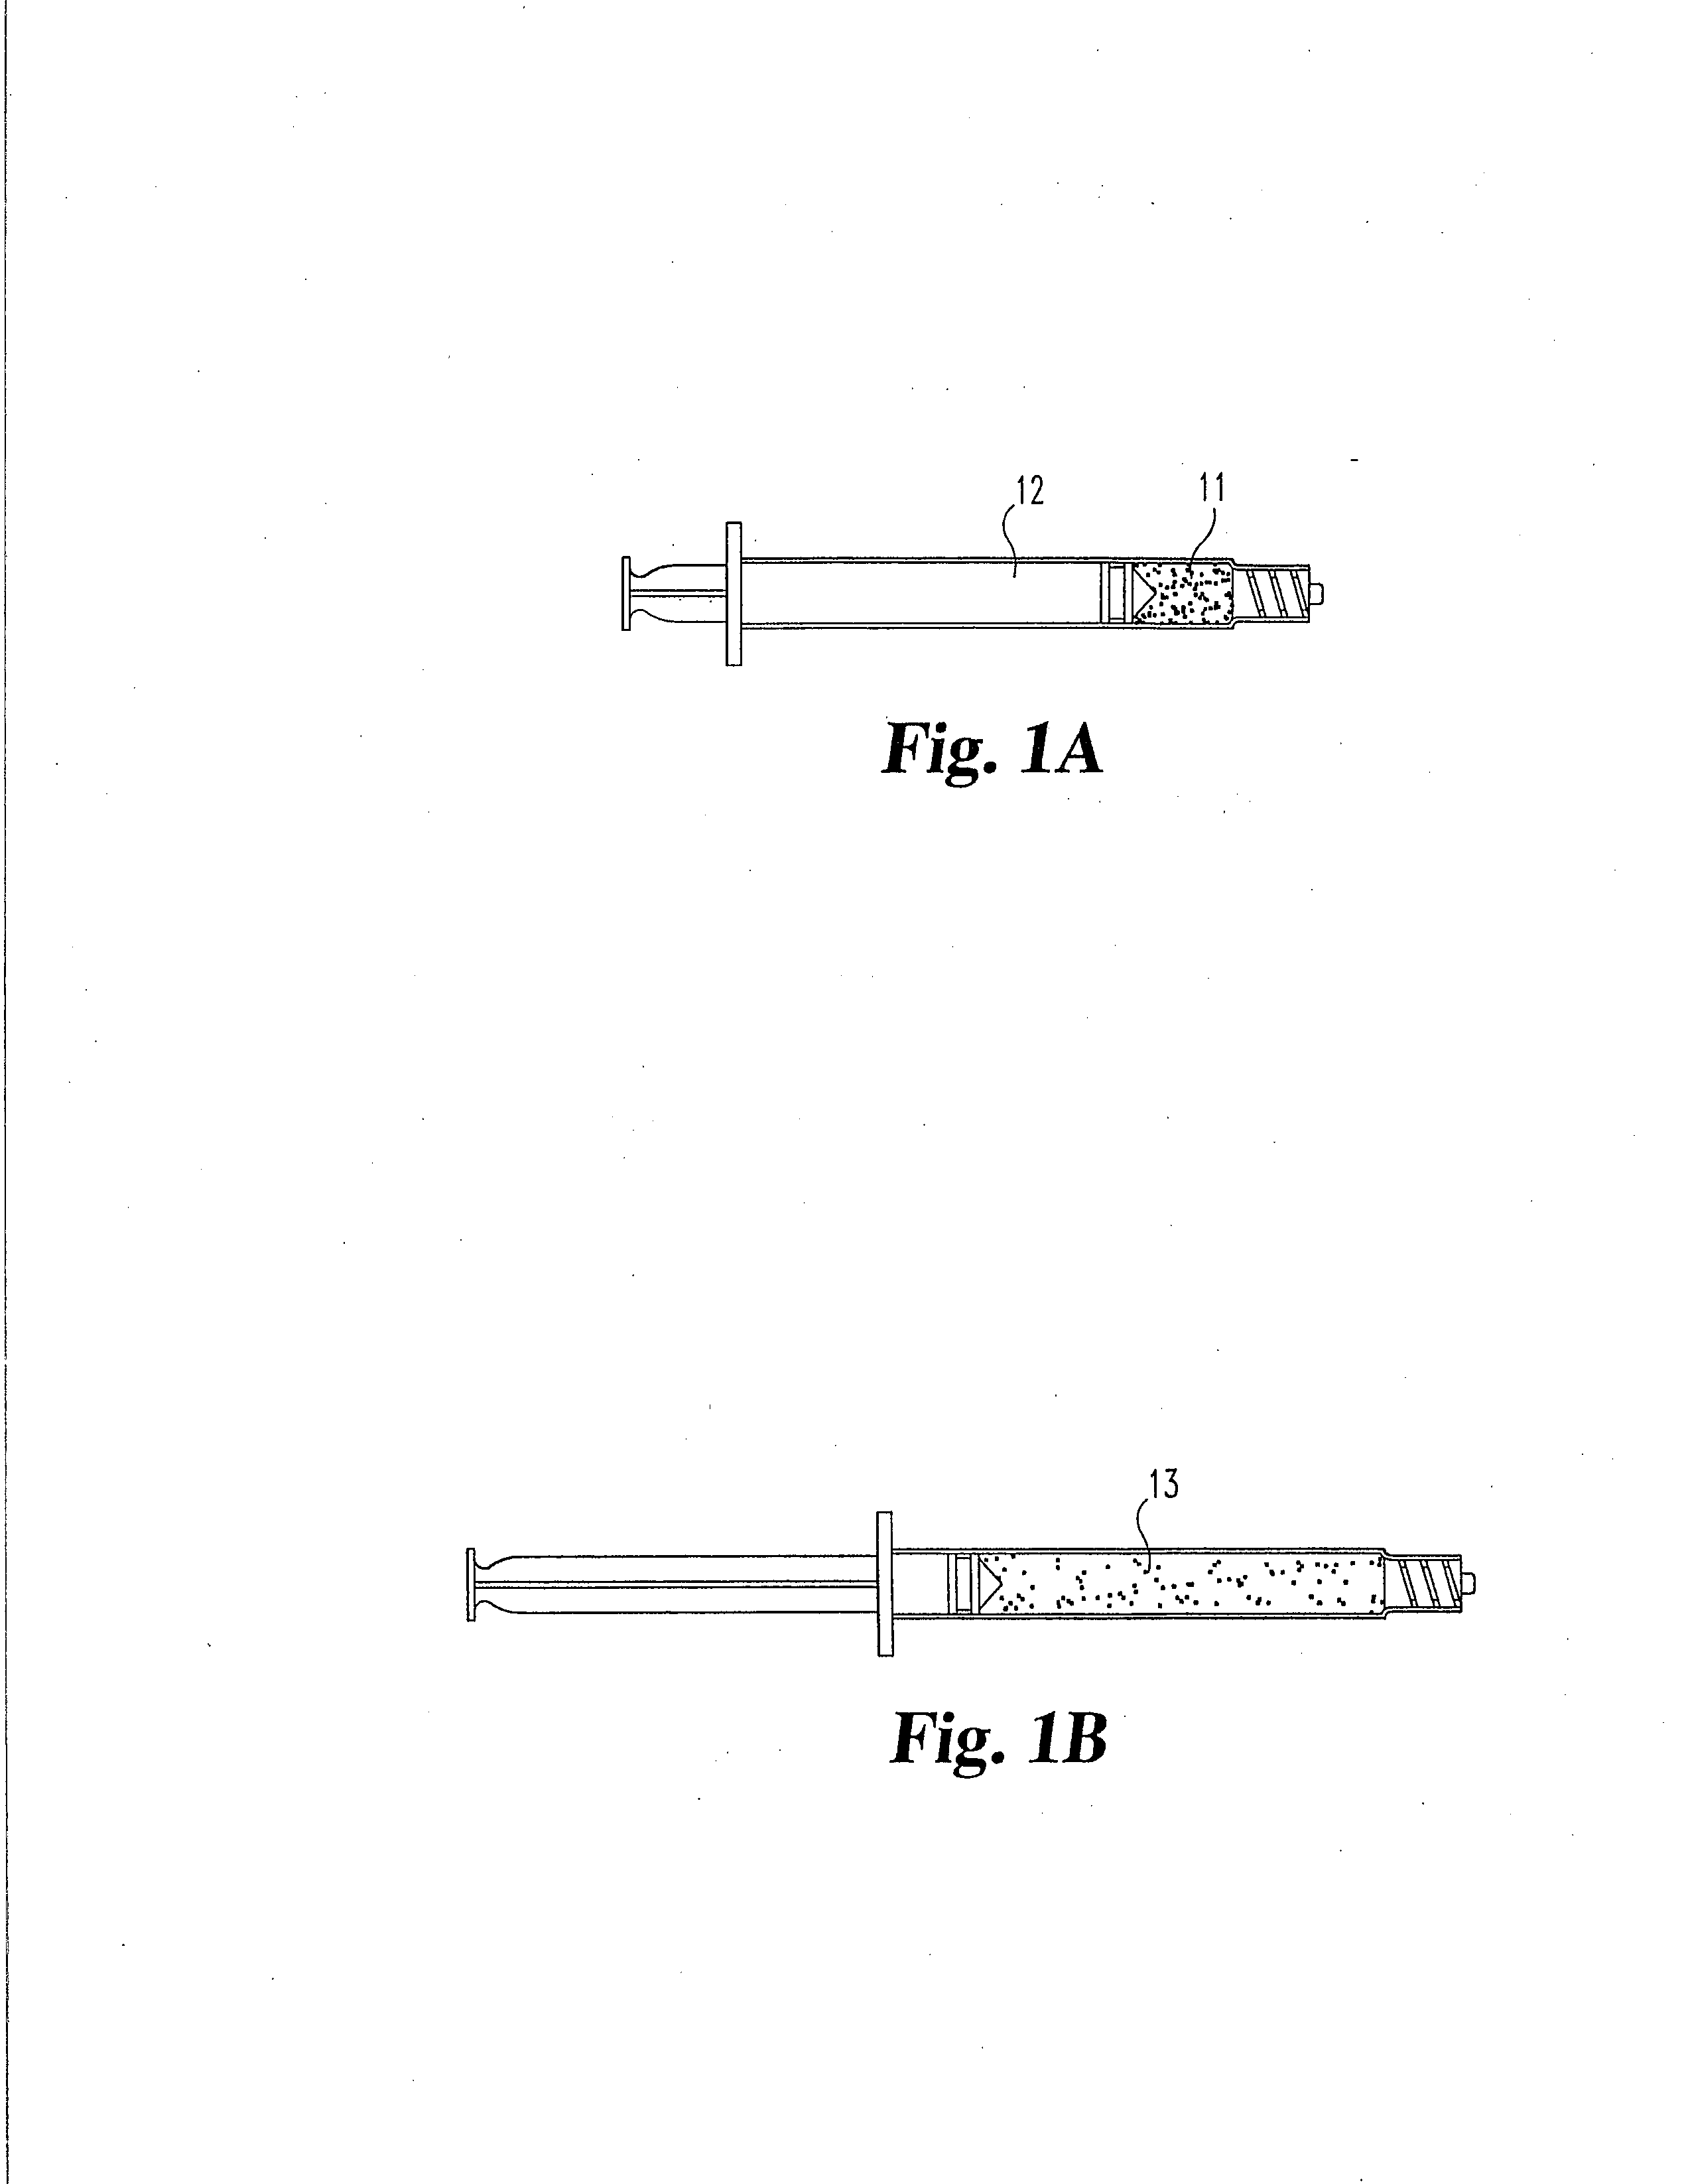 Collagen-based materials and methods for treating synovial joints